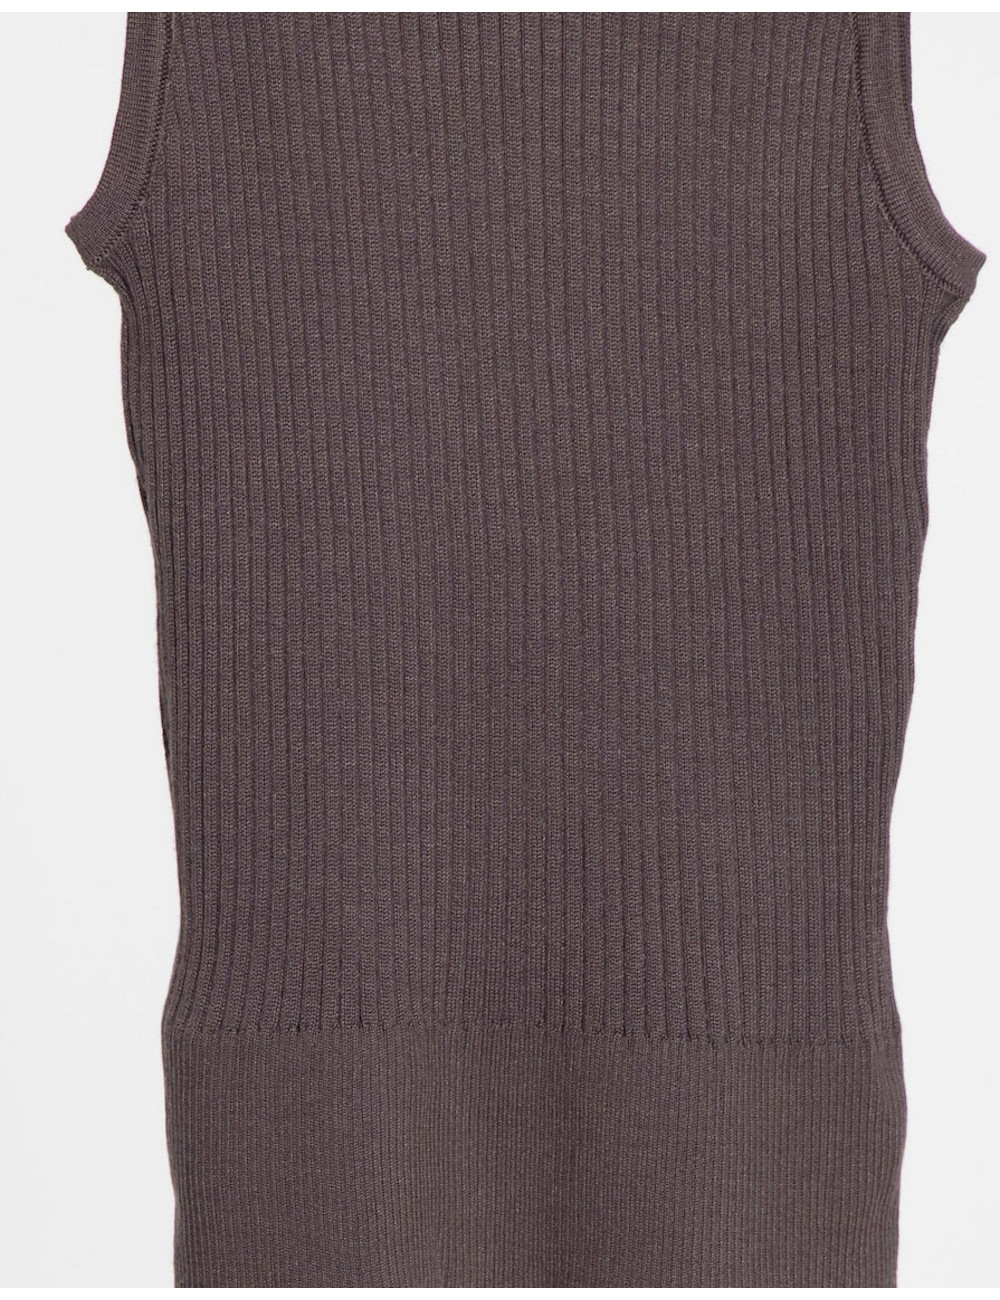 New Look ribbed knit...